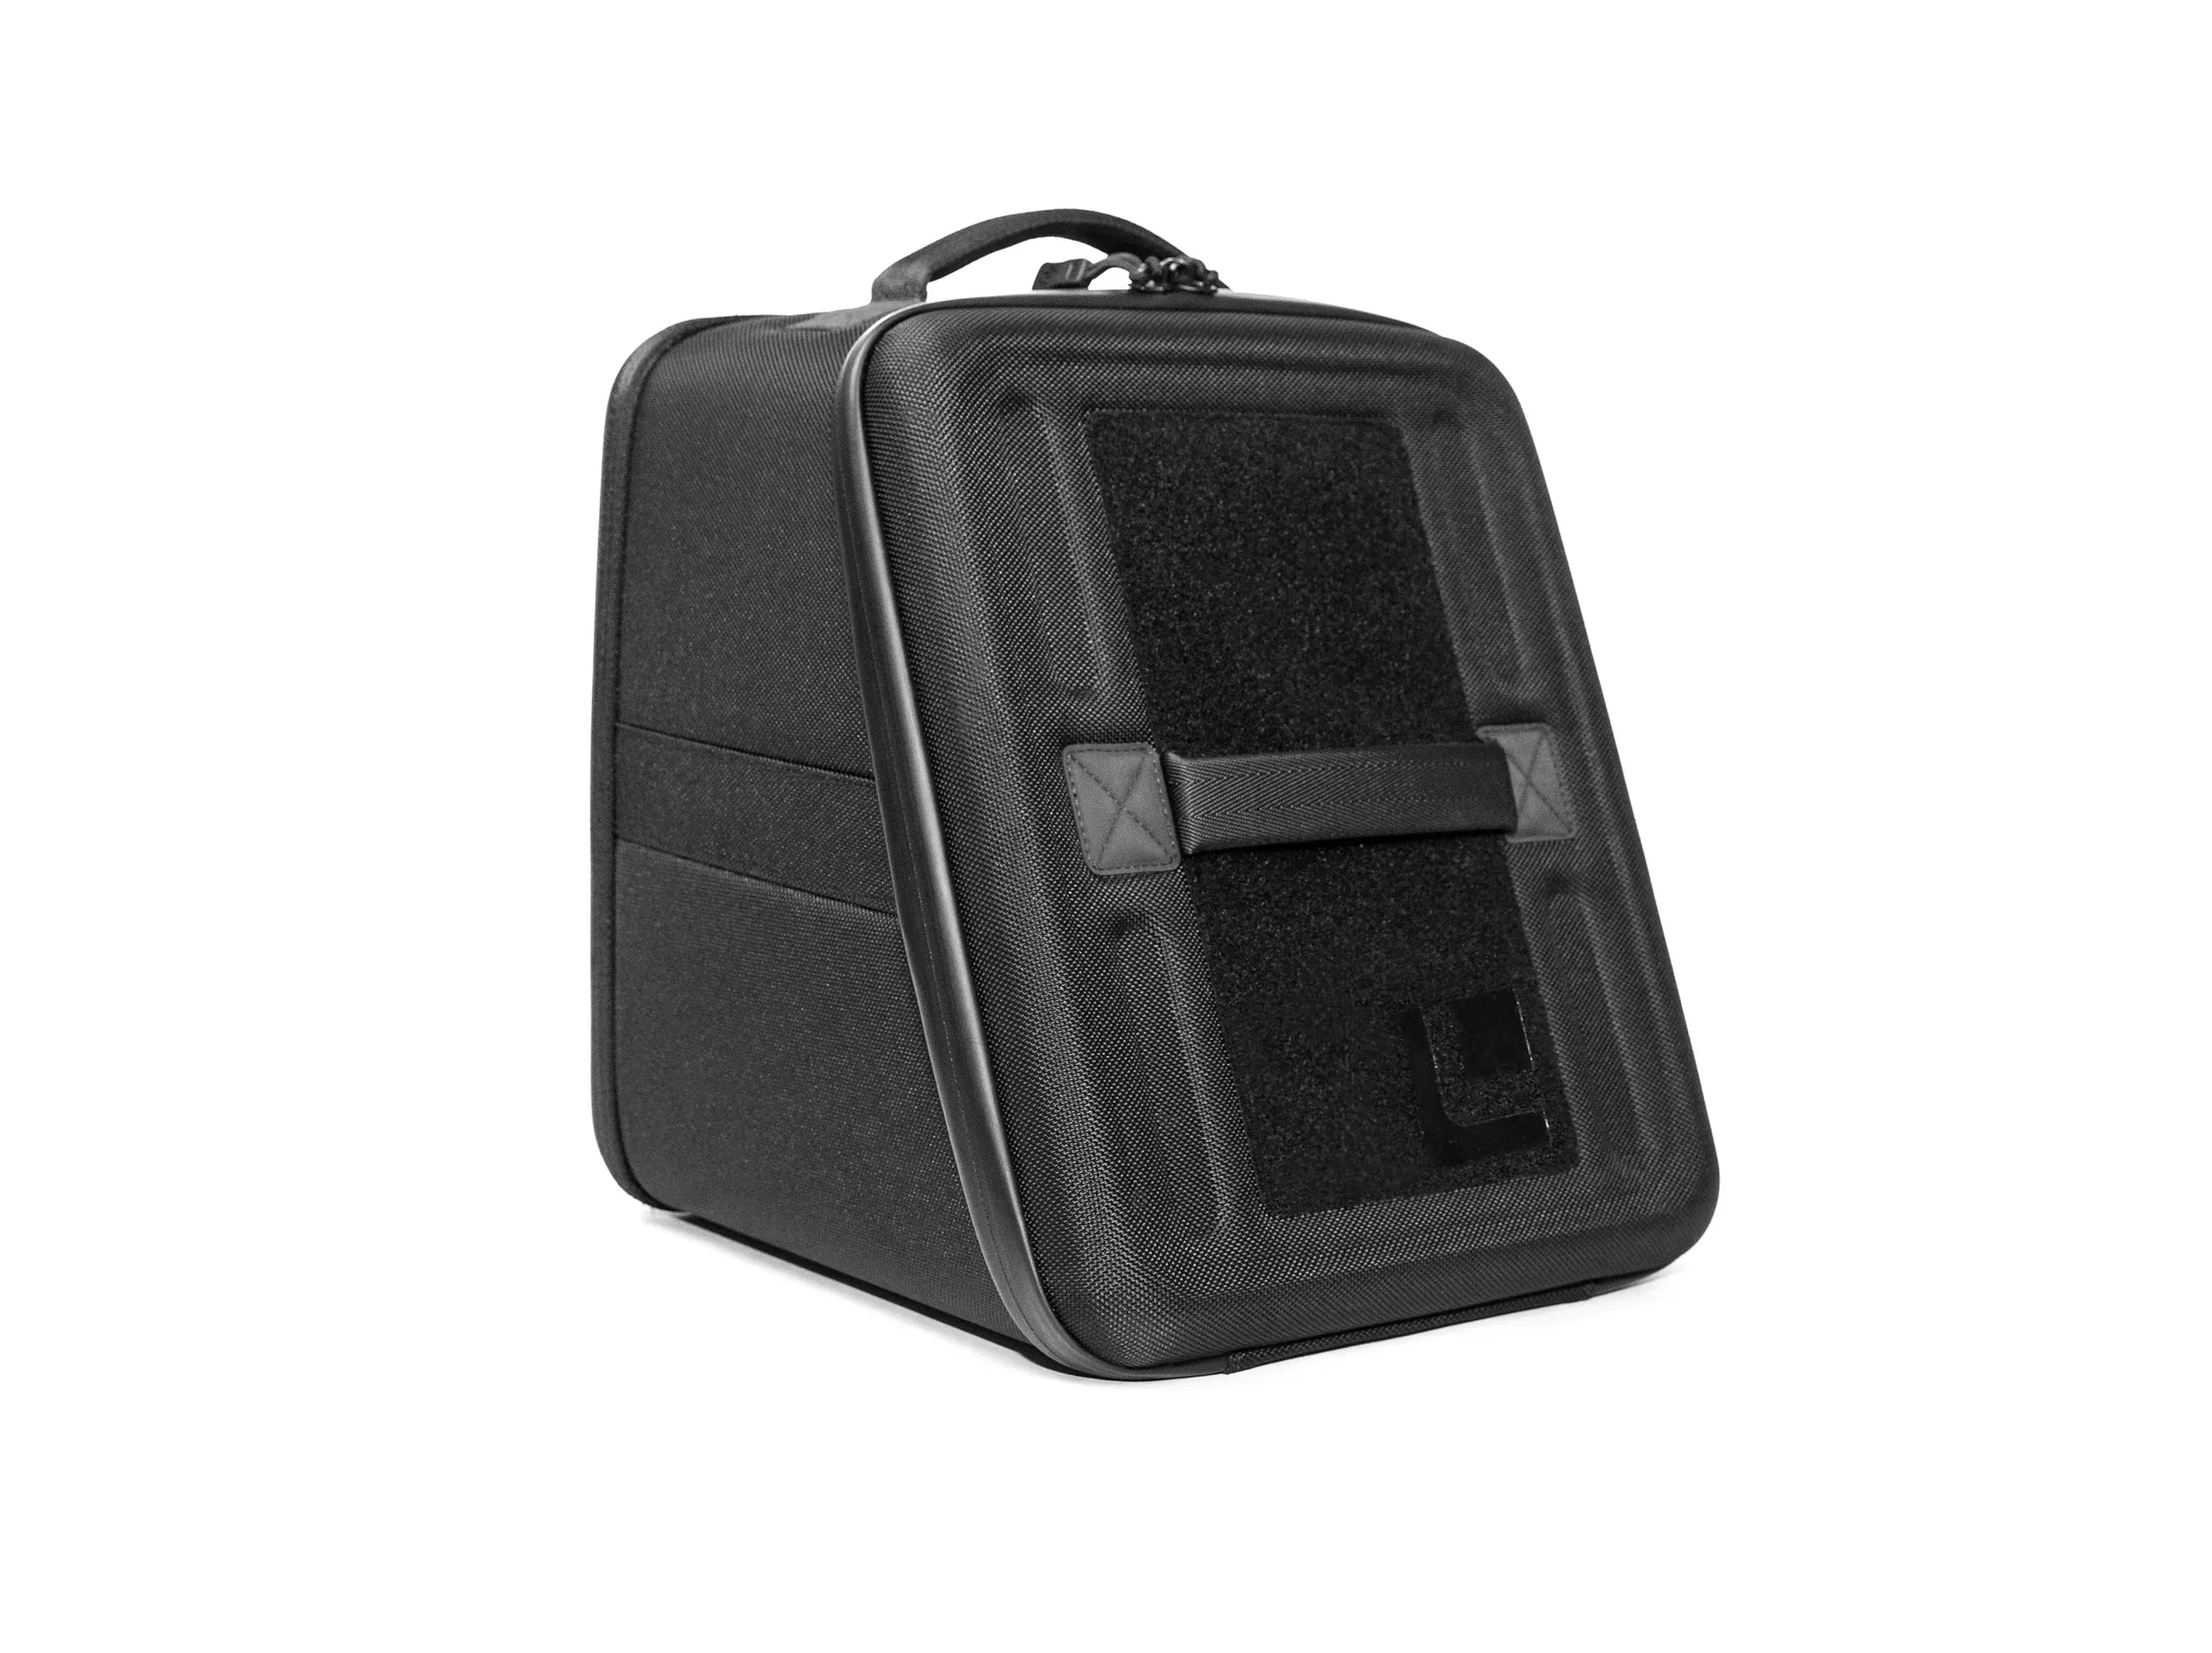 GearBAG G2